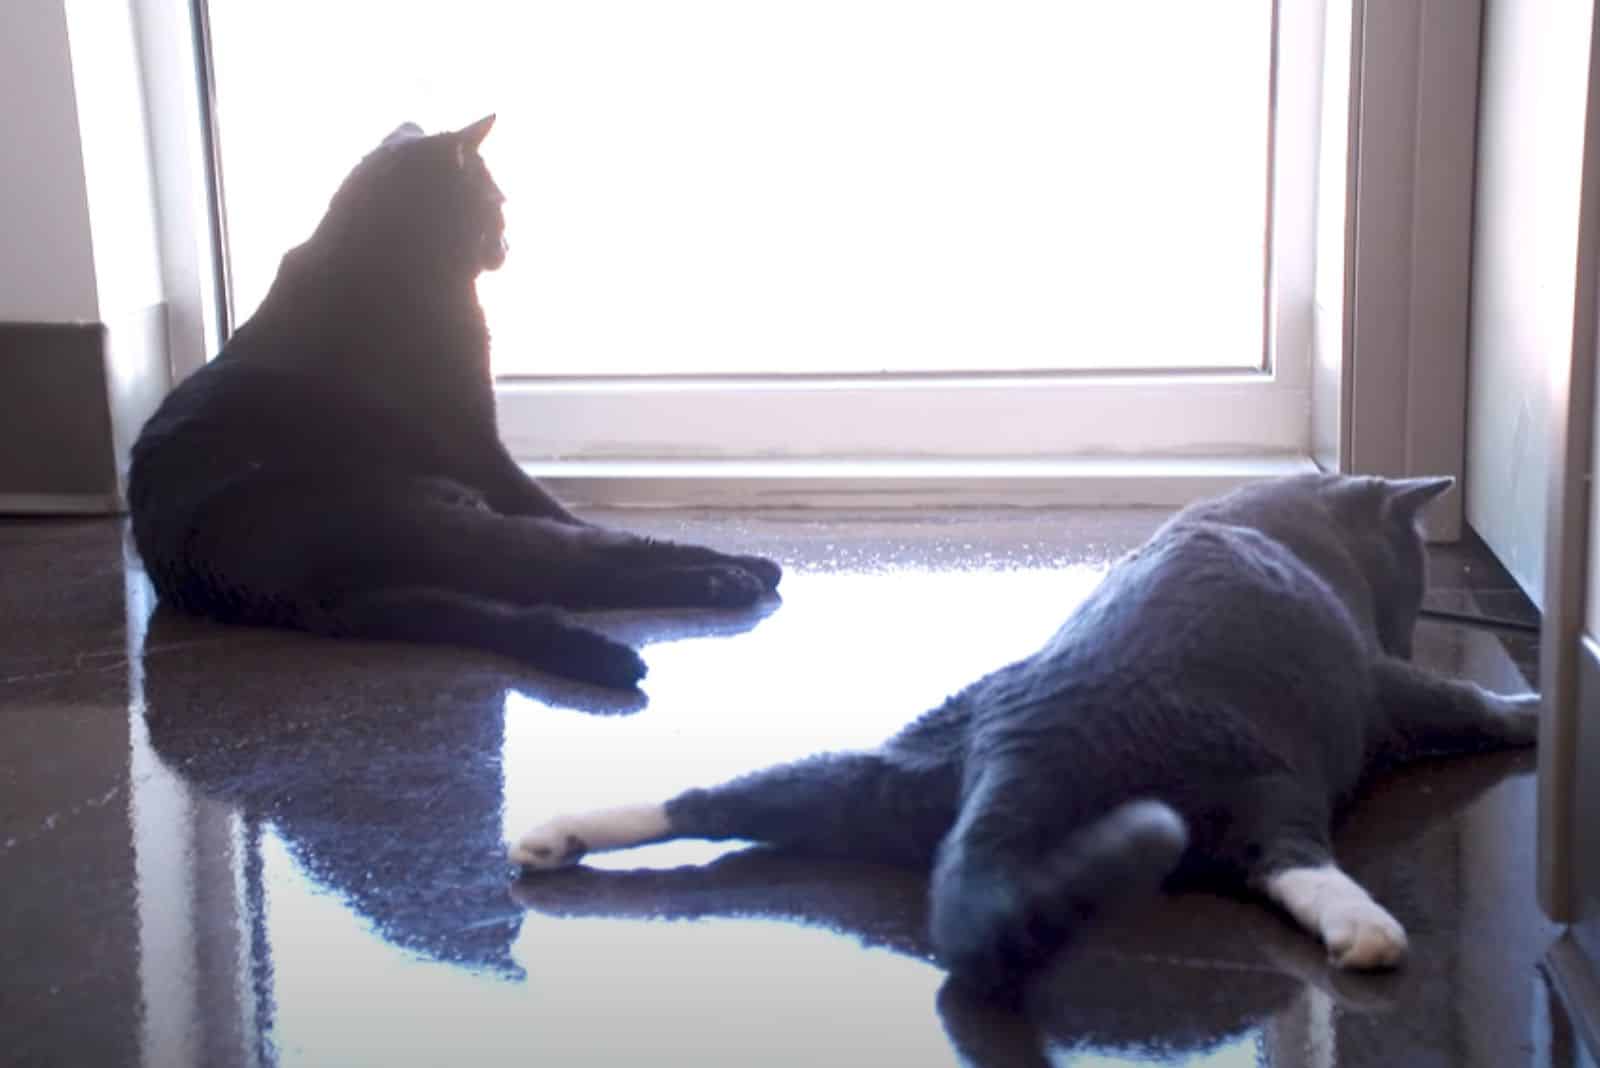 Kelly and Guapo, the two paralyzed cats lying on the floor